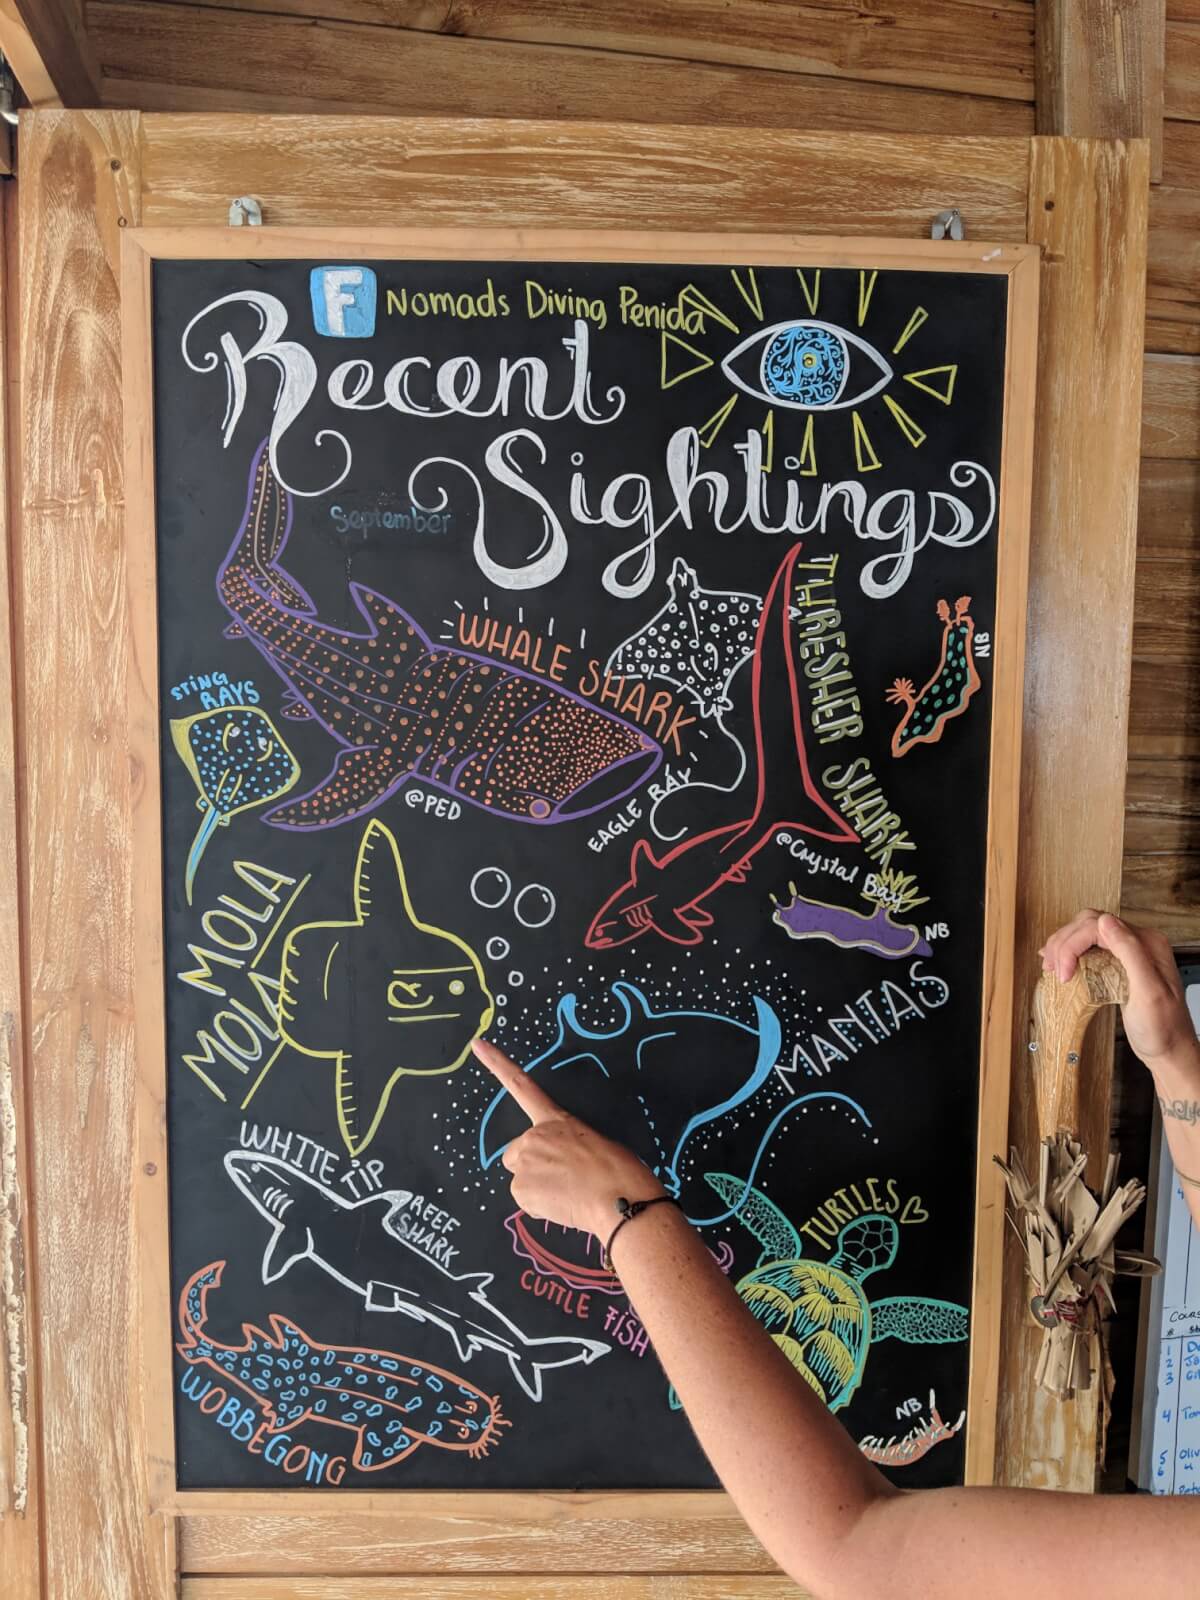 A chalkboard with recent species sighted 